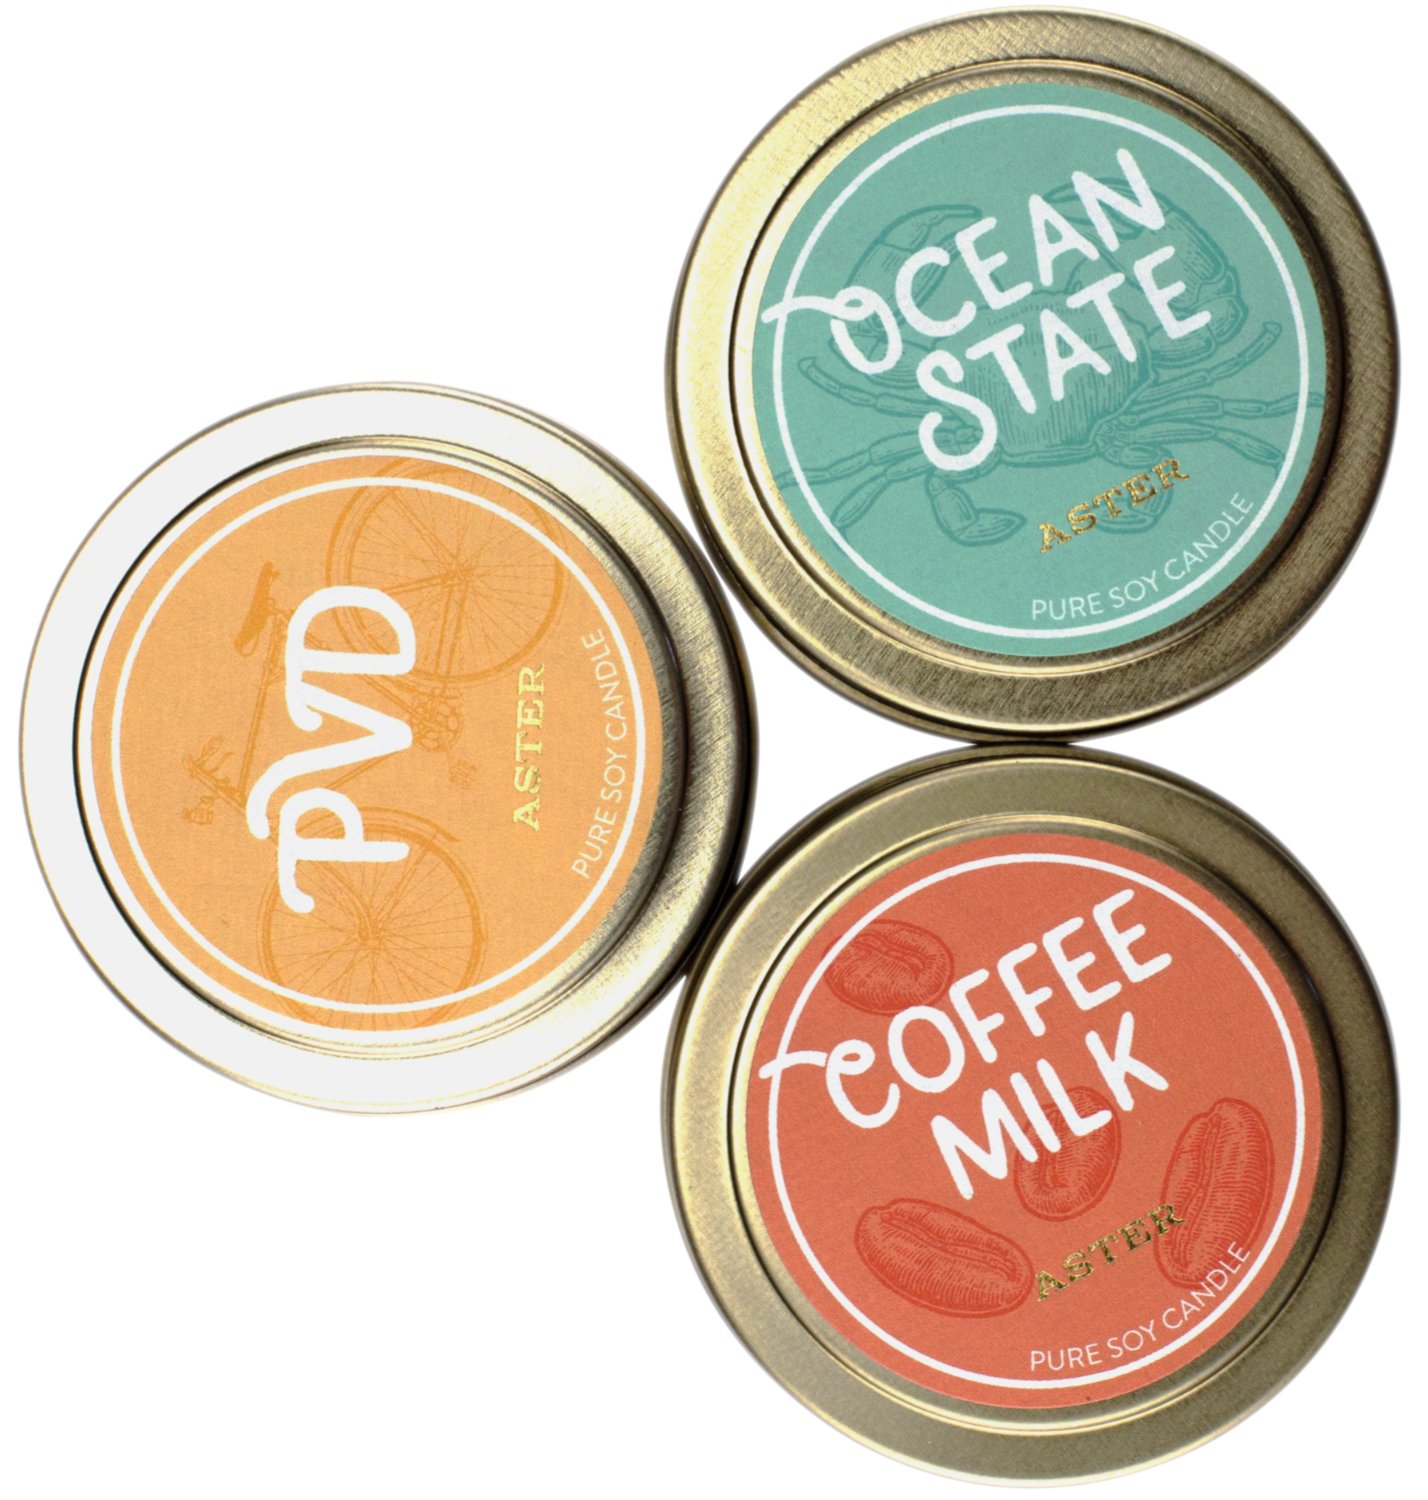 Aster Candle: Love from Rhode Island Collection pure soy candles are scented with essential oils. $12 each.